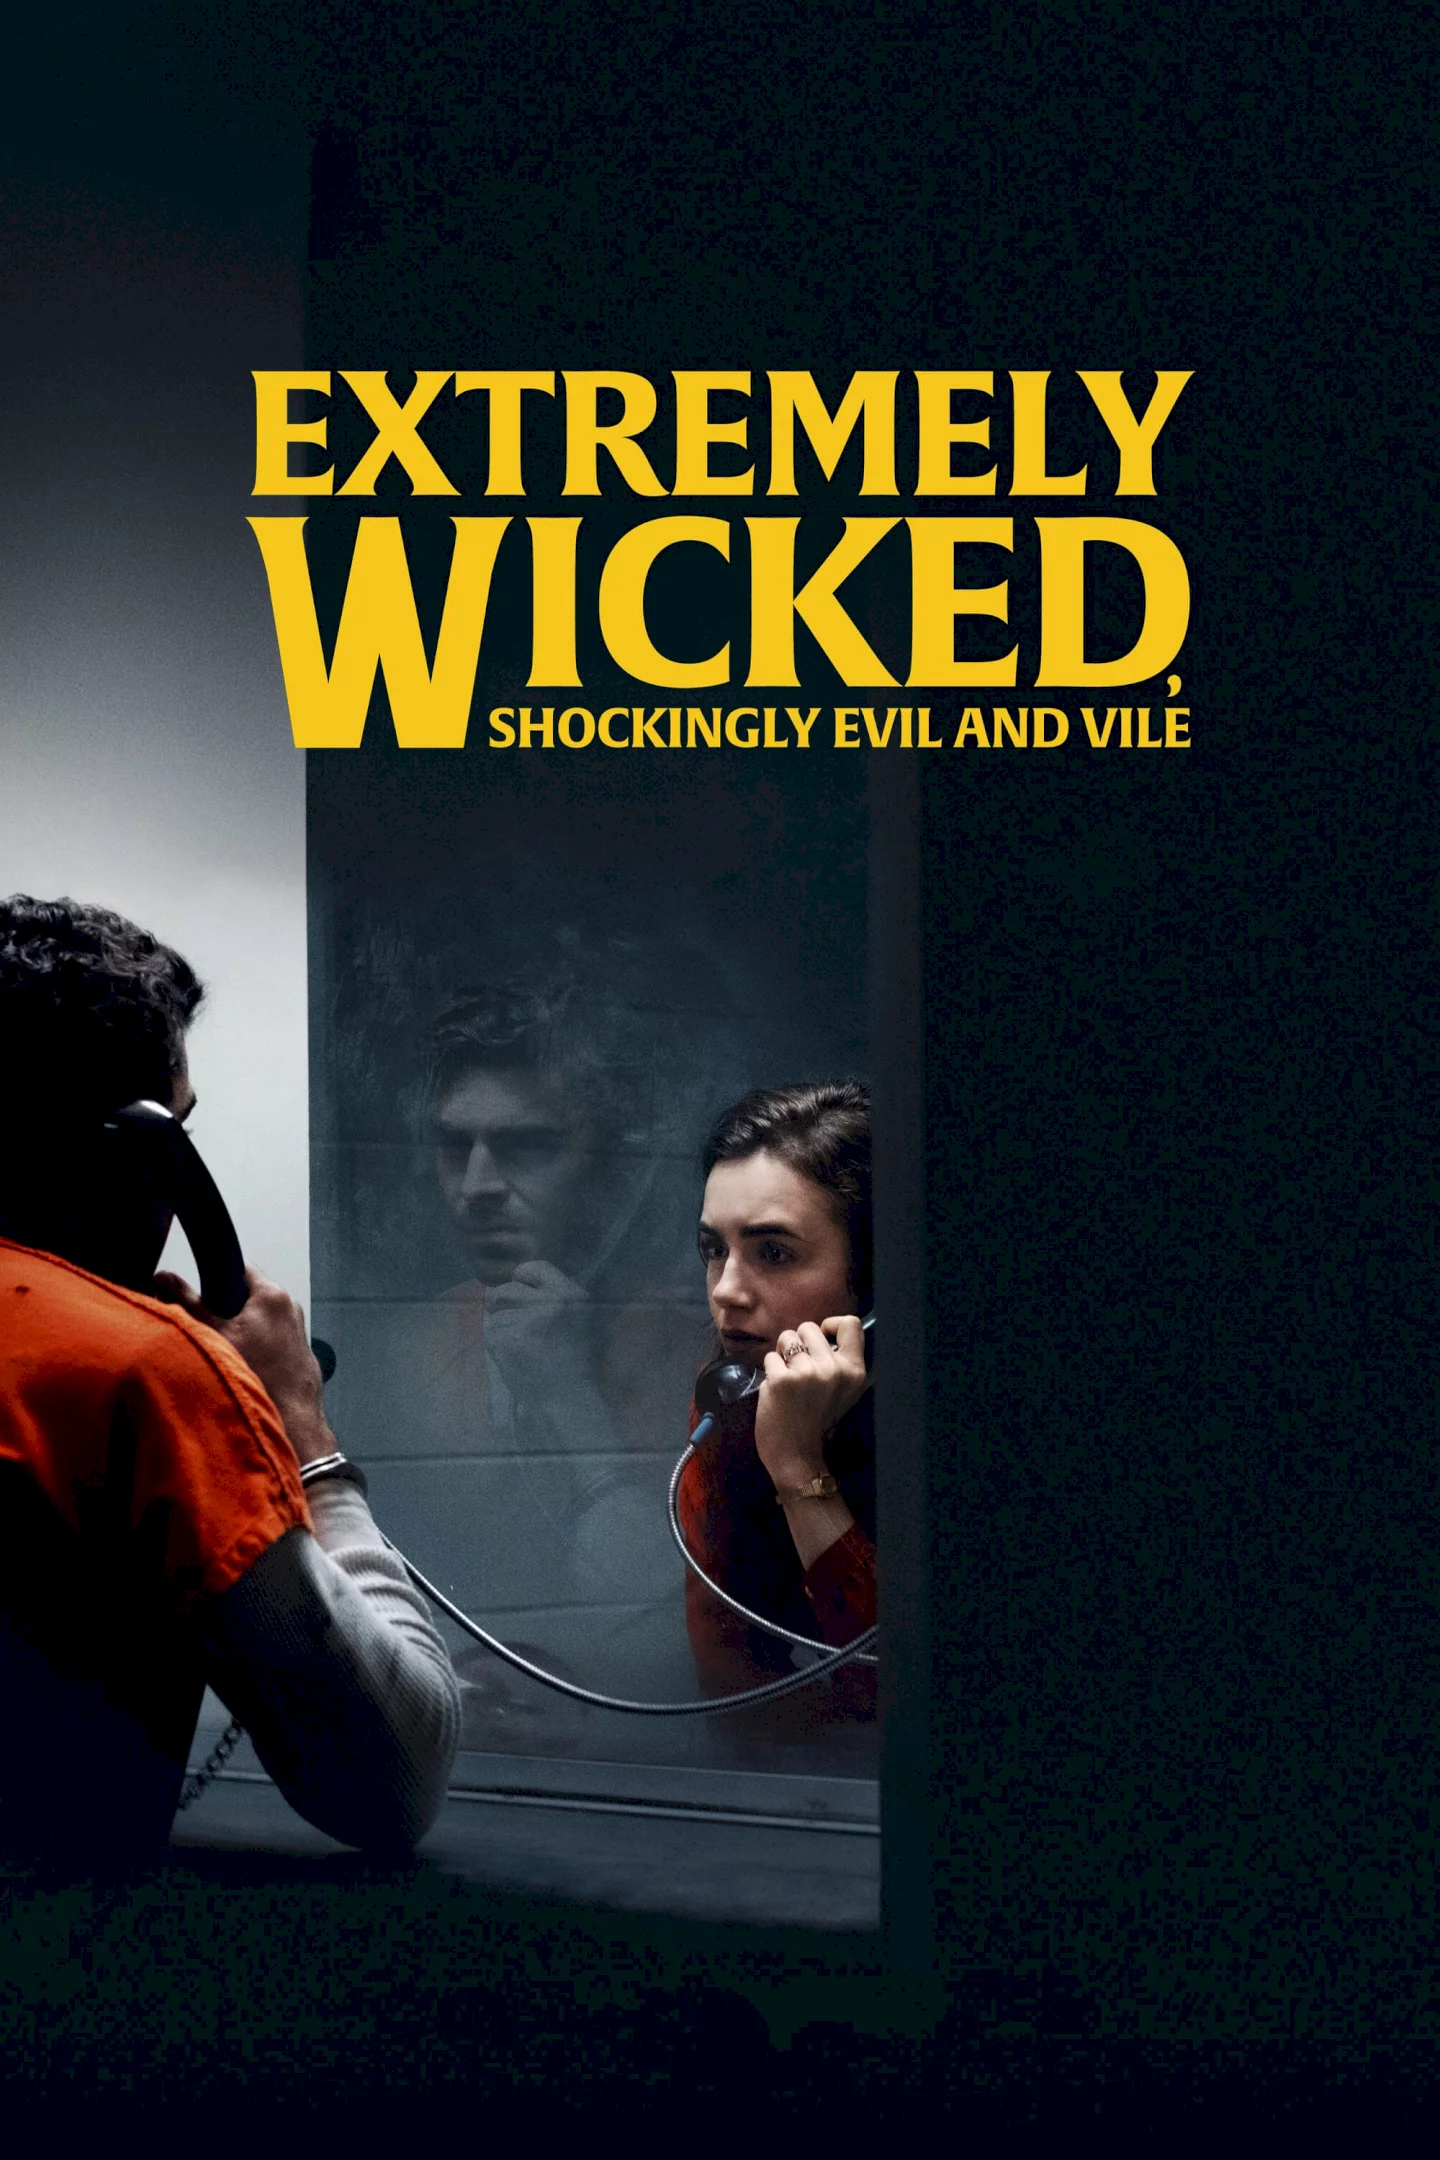 Photo 11 du film : Extremely Wicked, Shockingly Evil and Vile